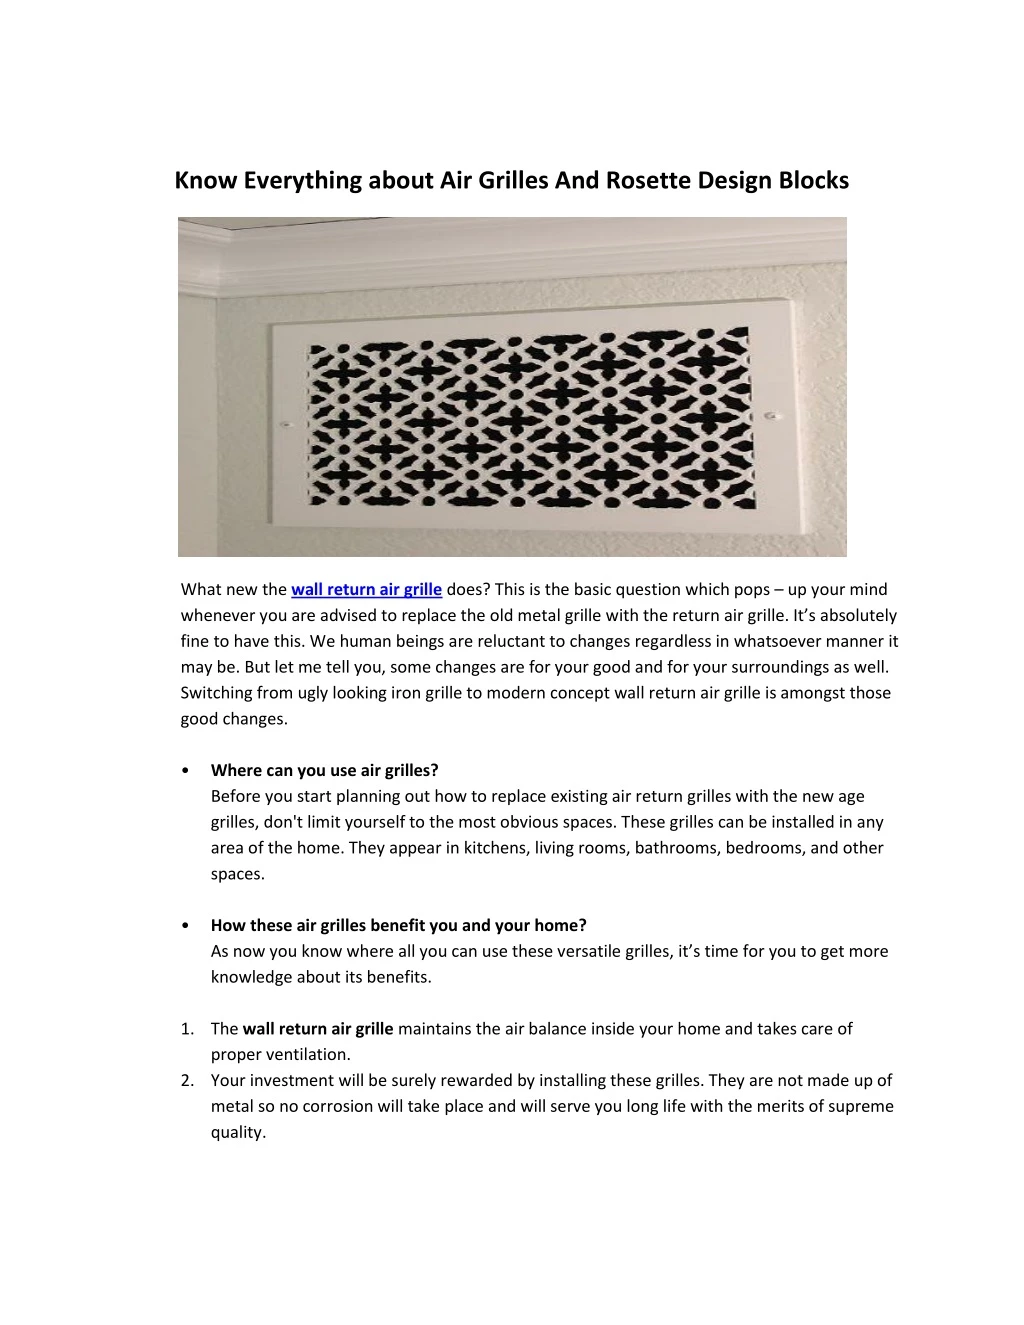 know everything about air grilles and rosette